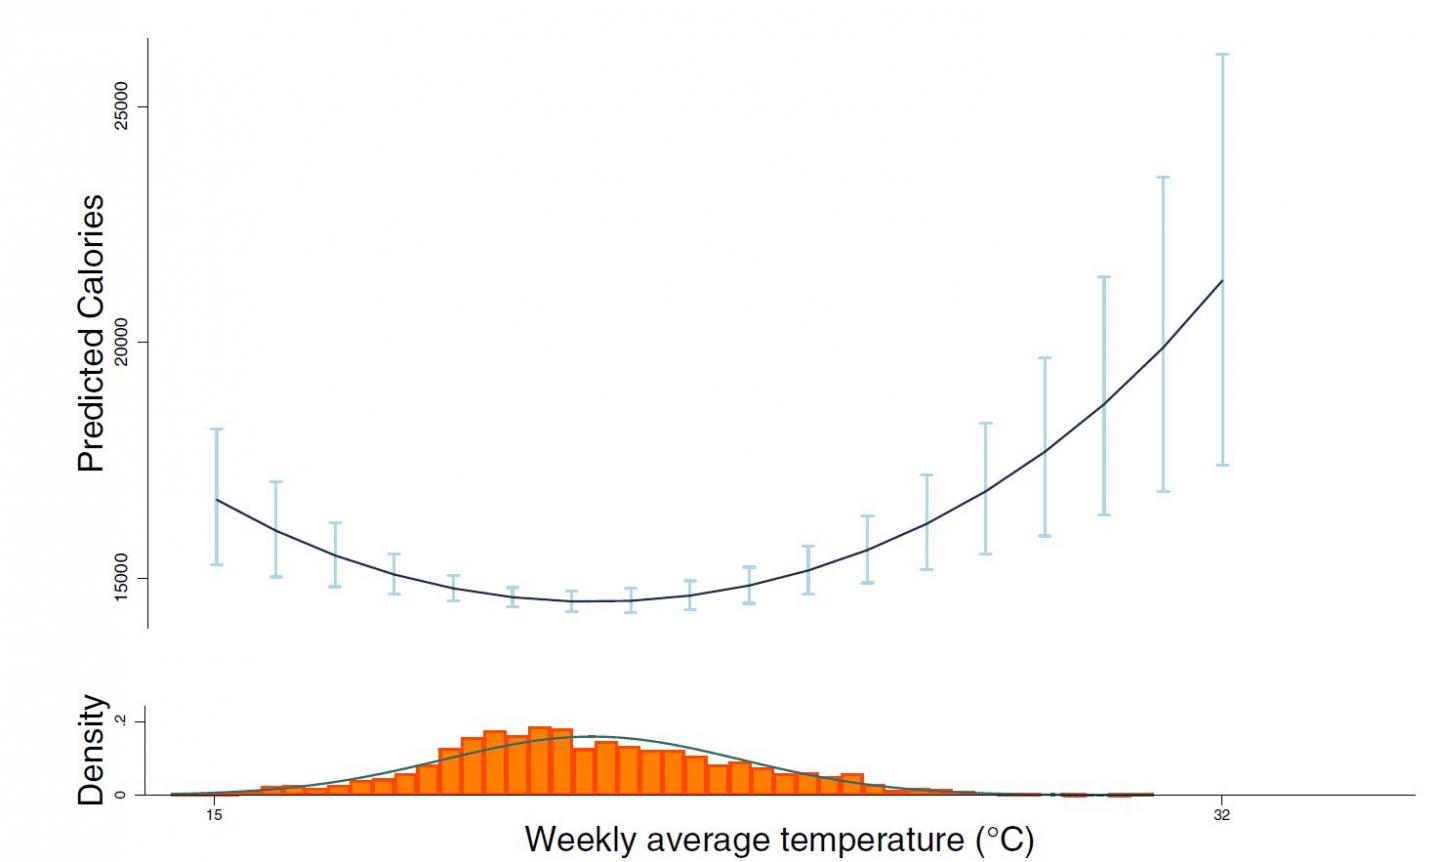 Relationship Between Weekly Temperature and Weekly Calorie Intake